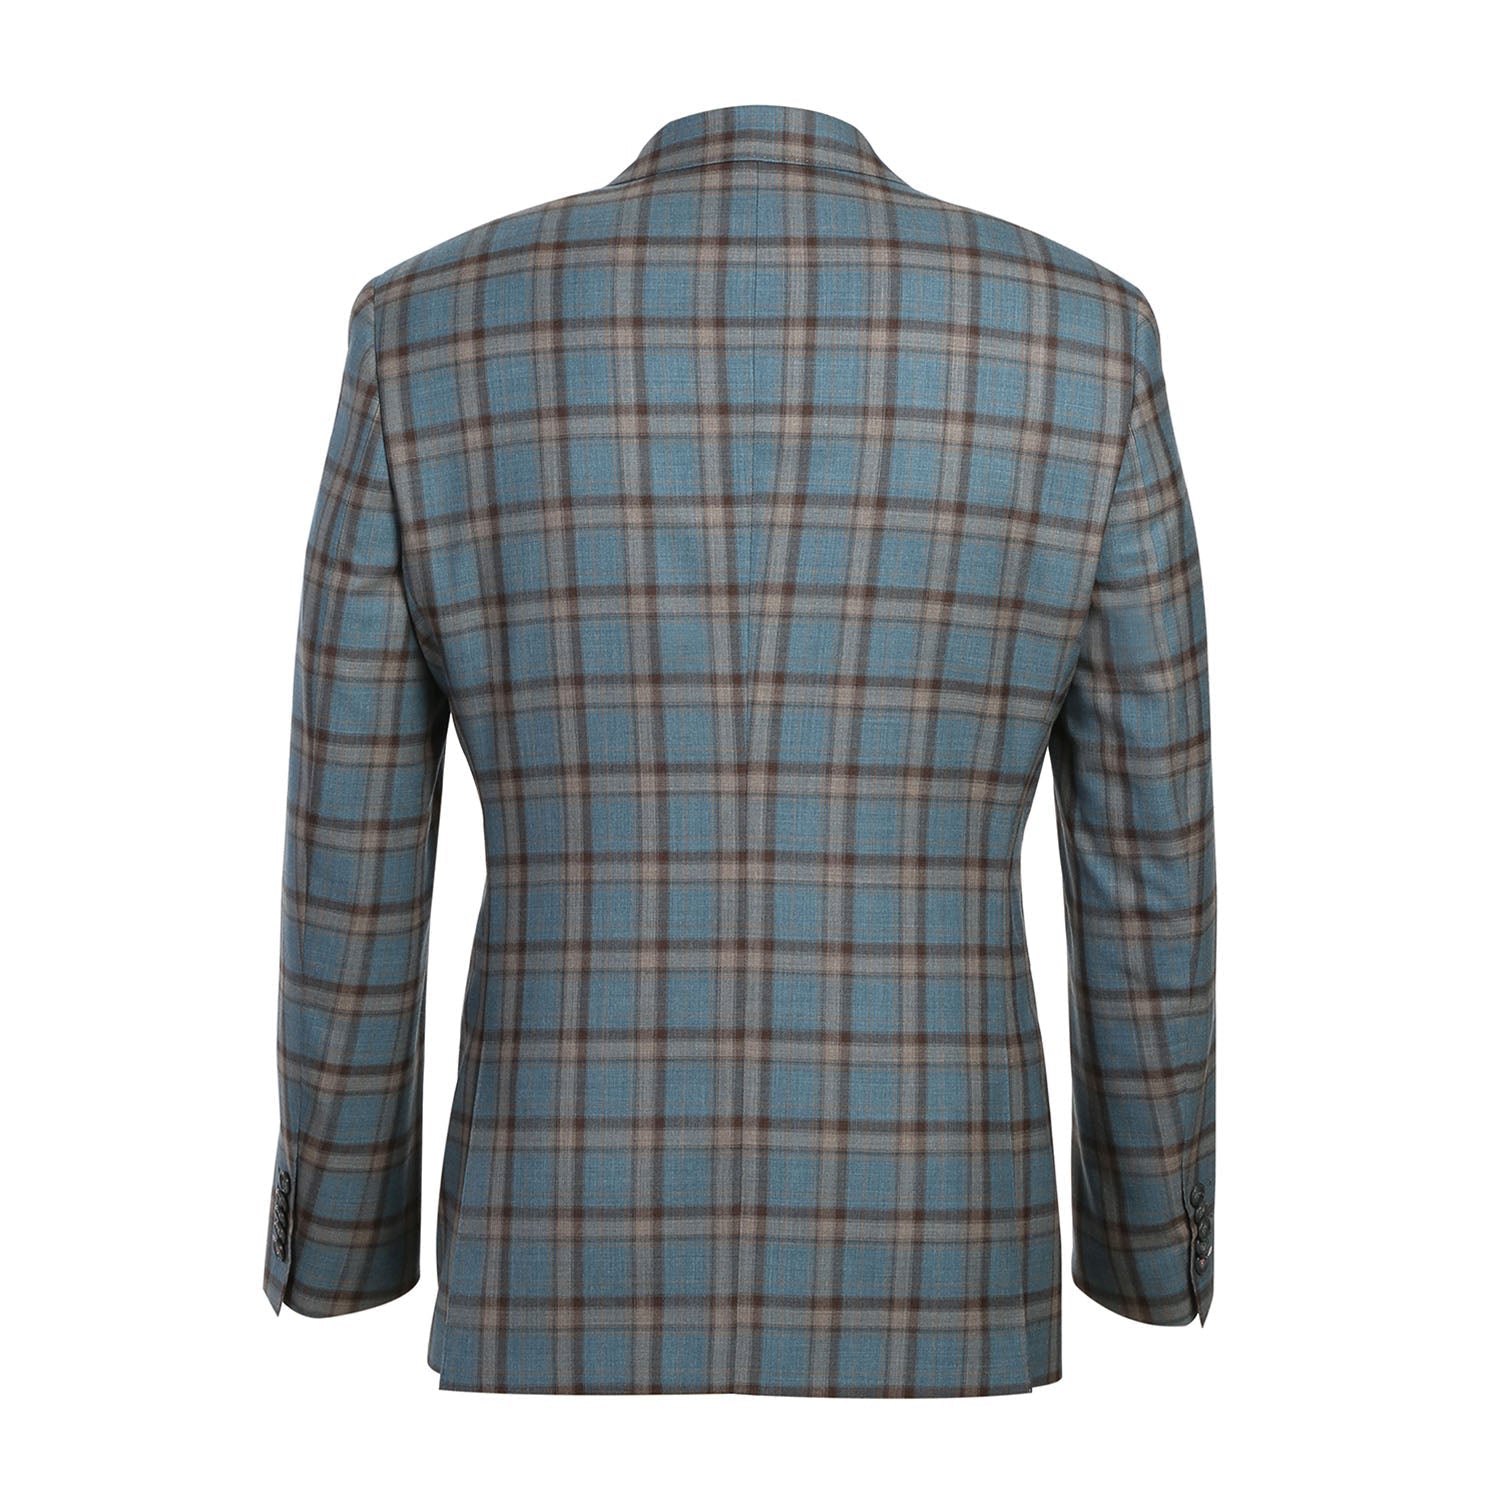 Wool Stretch Double Breasted SLIM FIT Suit in Blue, Grey, and Bronze Check (Short, Regular, and Long Available) by English Laundry